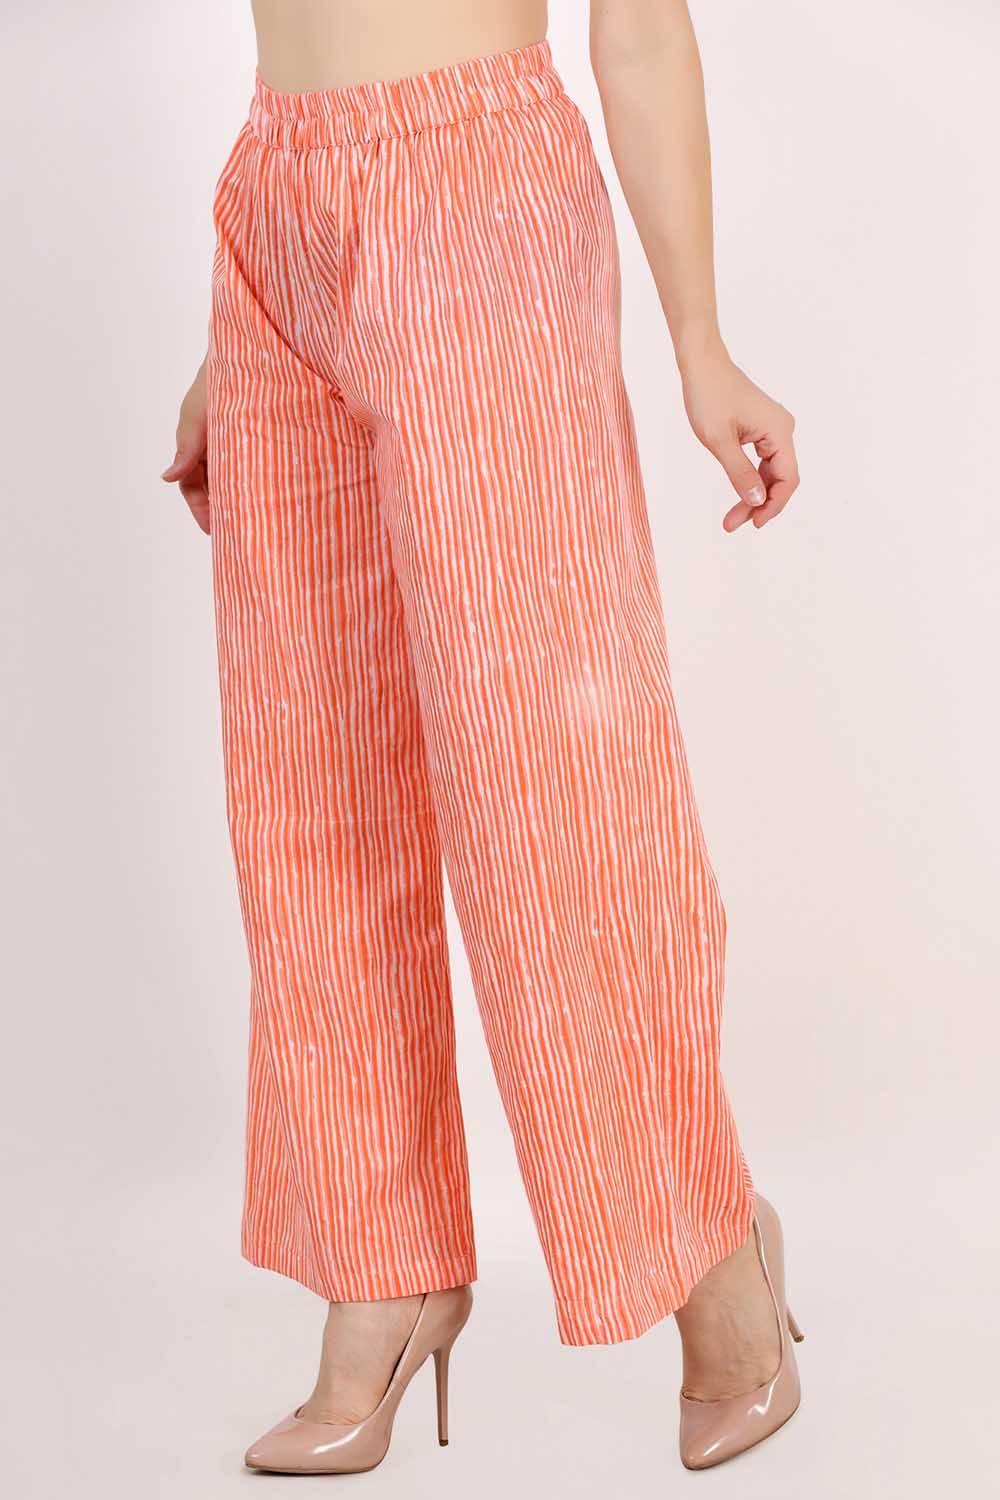 STRIPED PALAZZO PANTS & OFF SHOULDER RUFFLE TOP - Life with A.Co by Amanda  L. Conquer